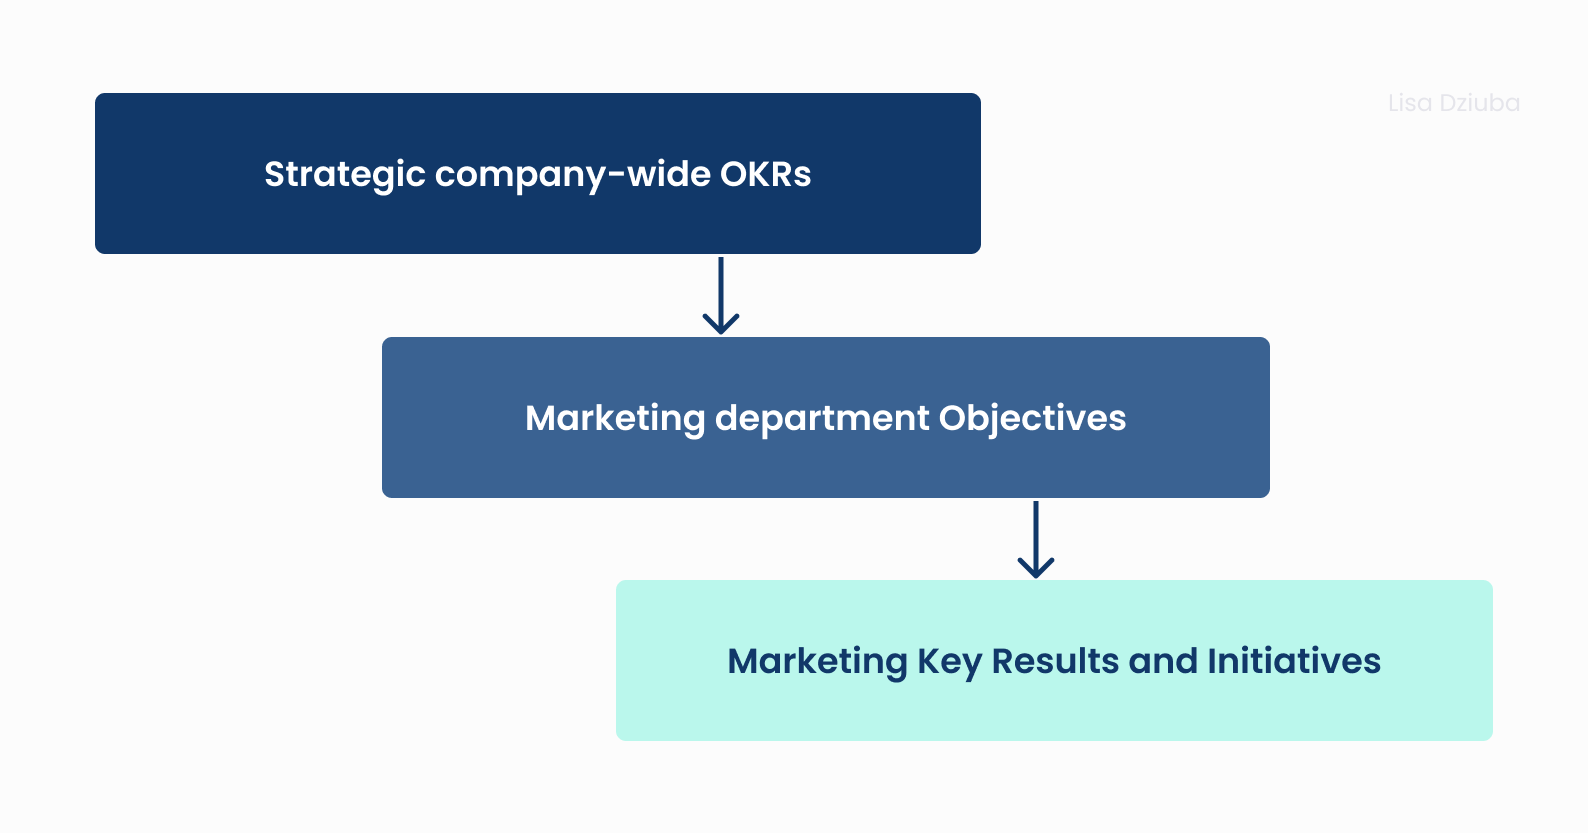 strategic company-wide OKRs go to marketing department objectives, go to marketing key results and initiatives